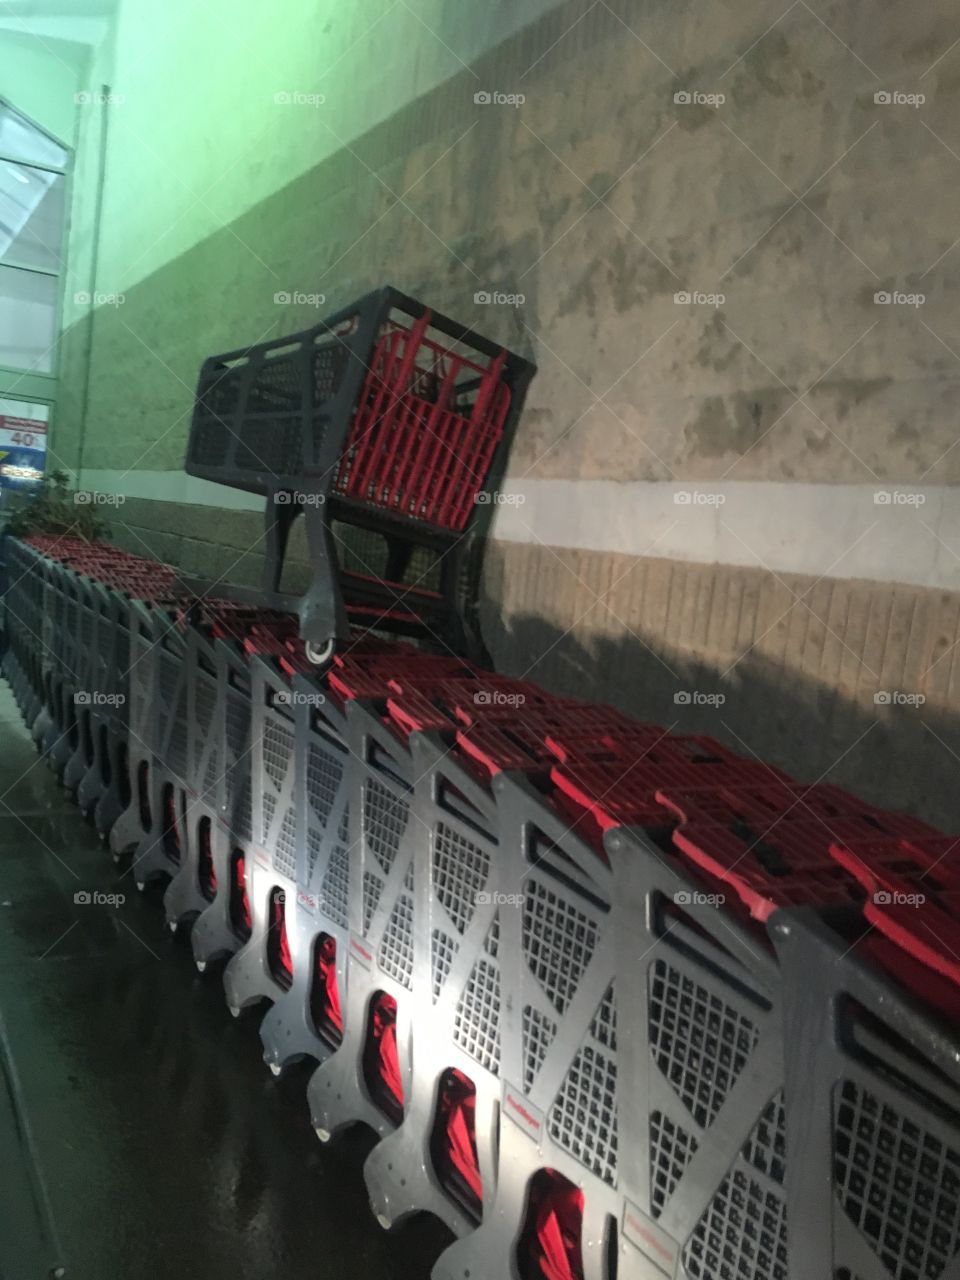 funny photo of a shopping cart put in the wrong place